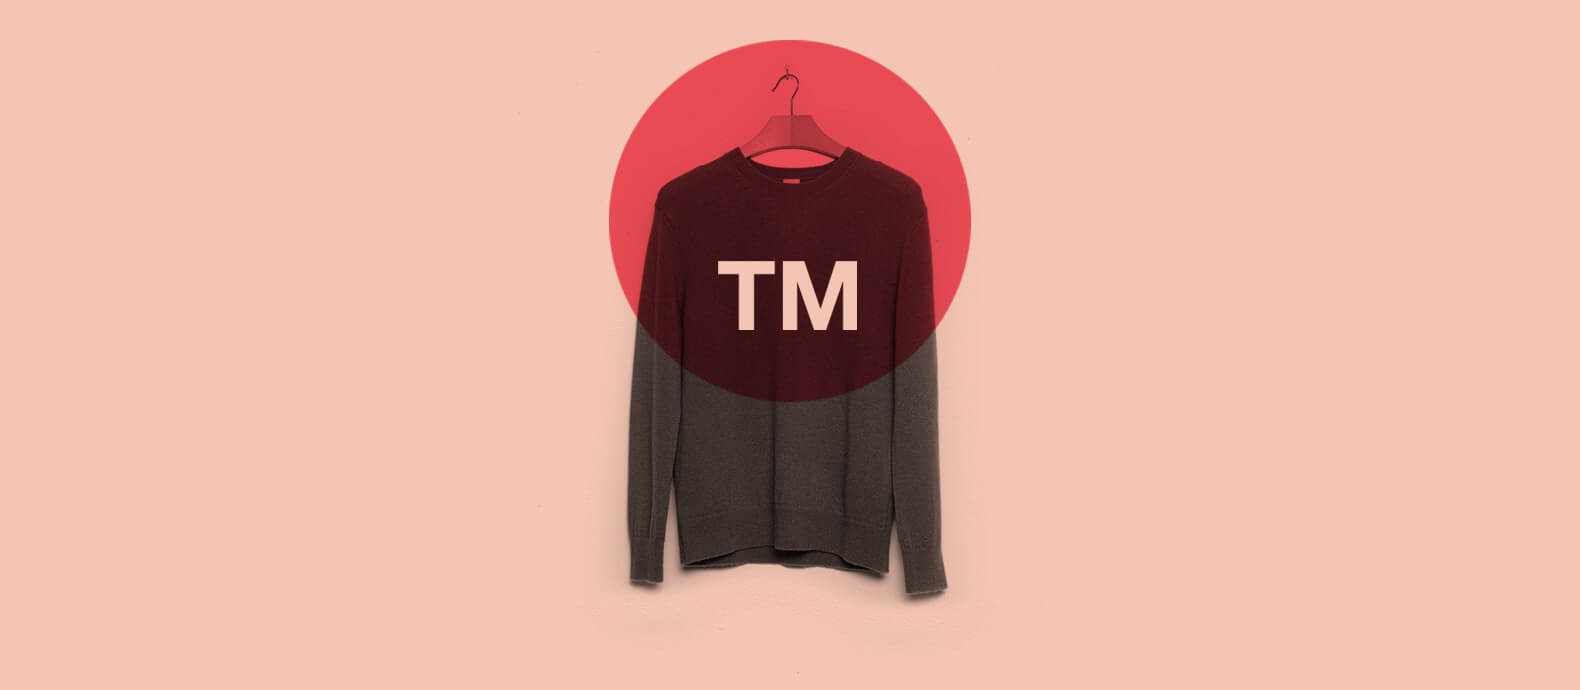 How to trademark a clothing brand